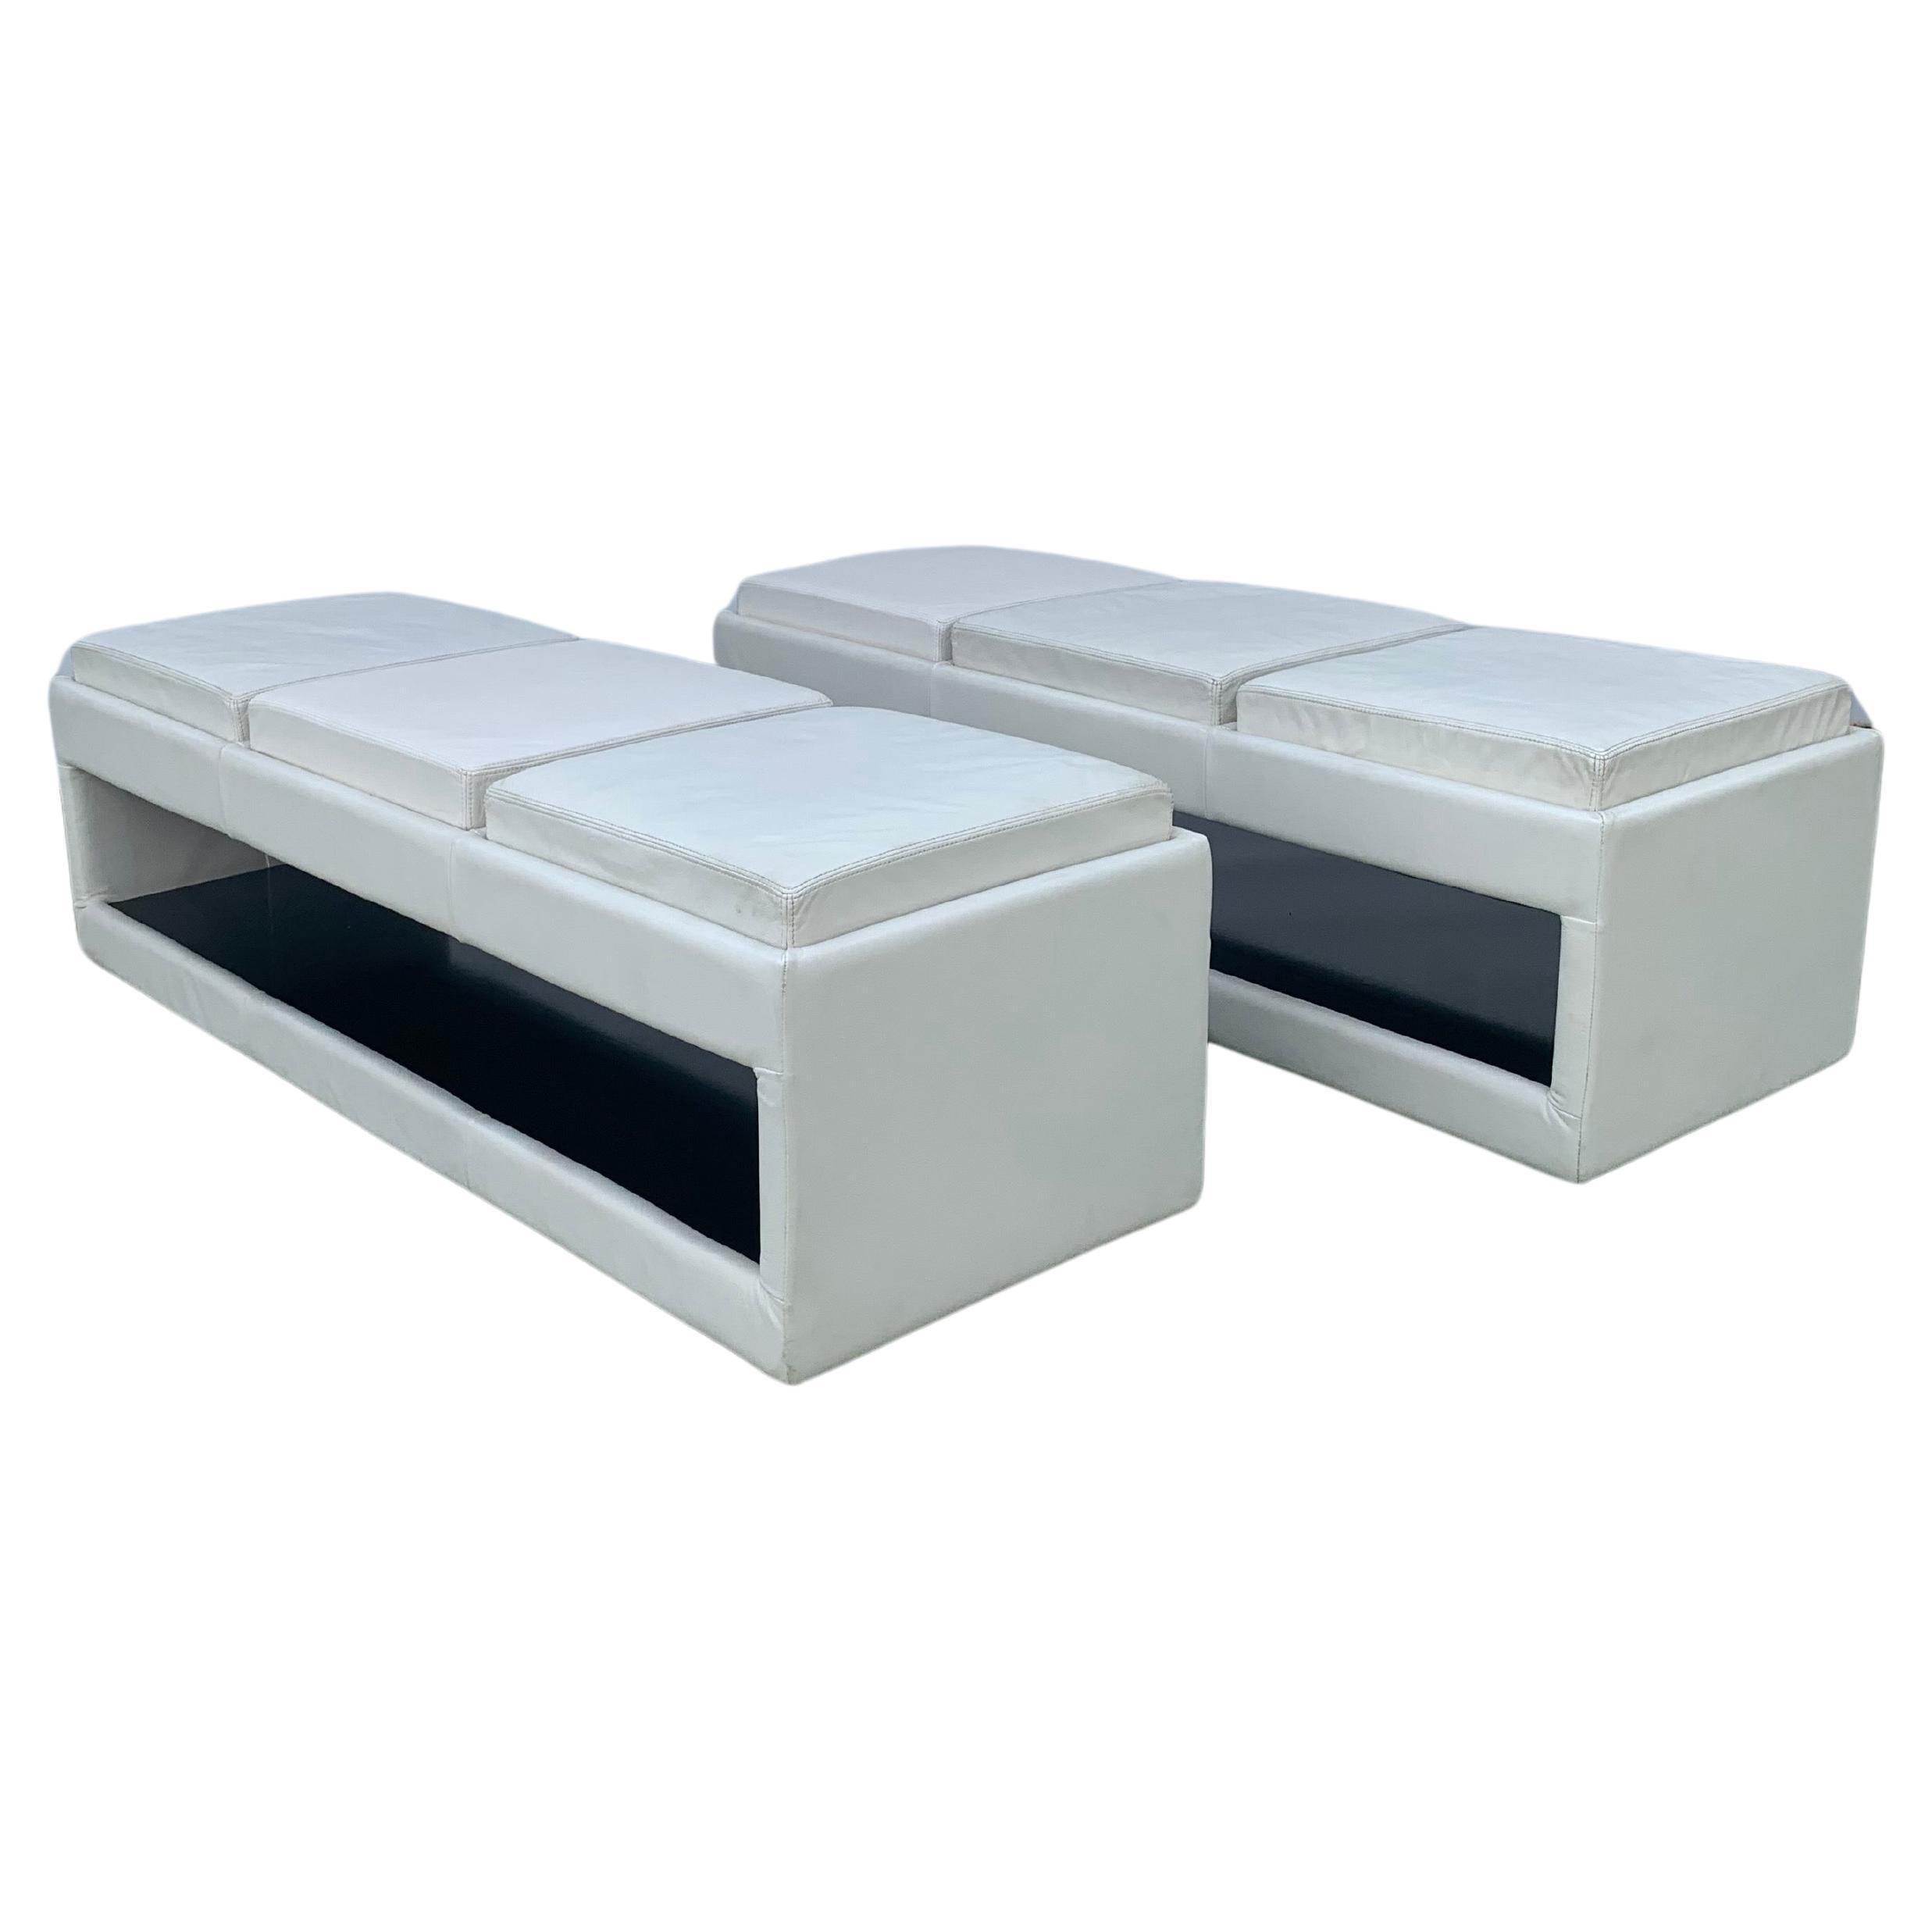 American Leather 3 Seat Benches in White, a Pair